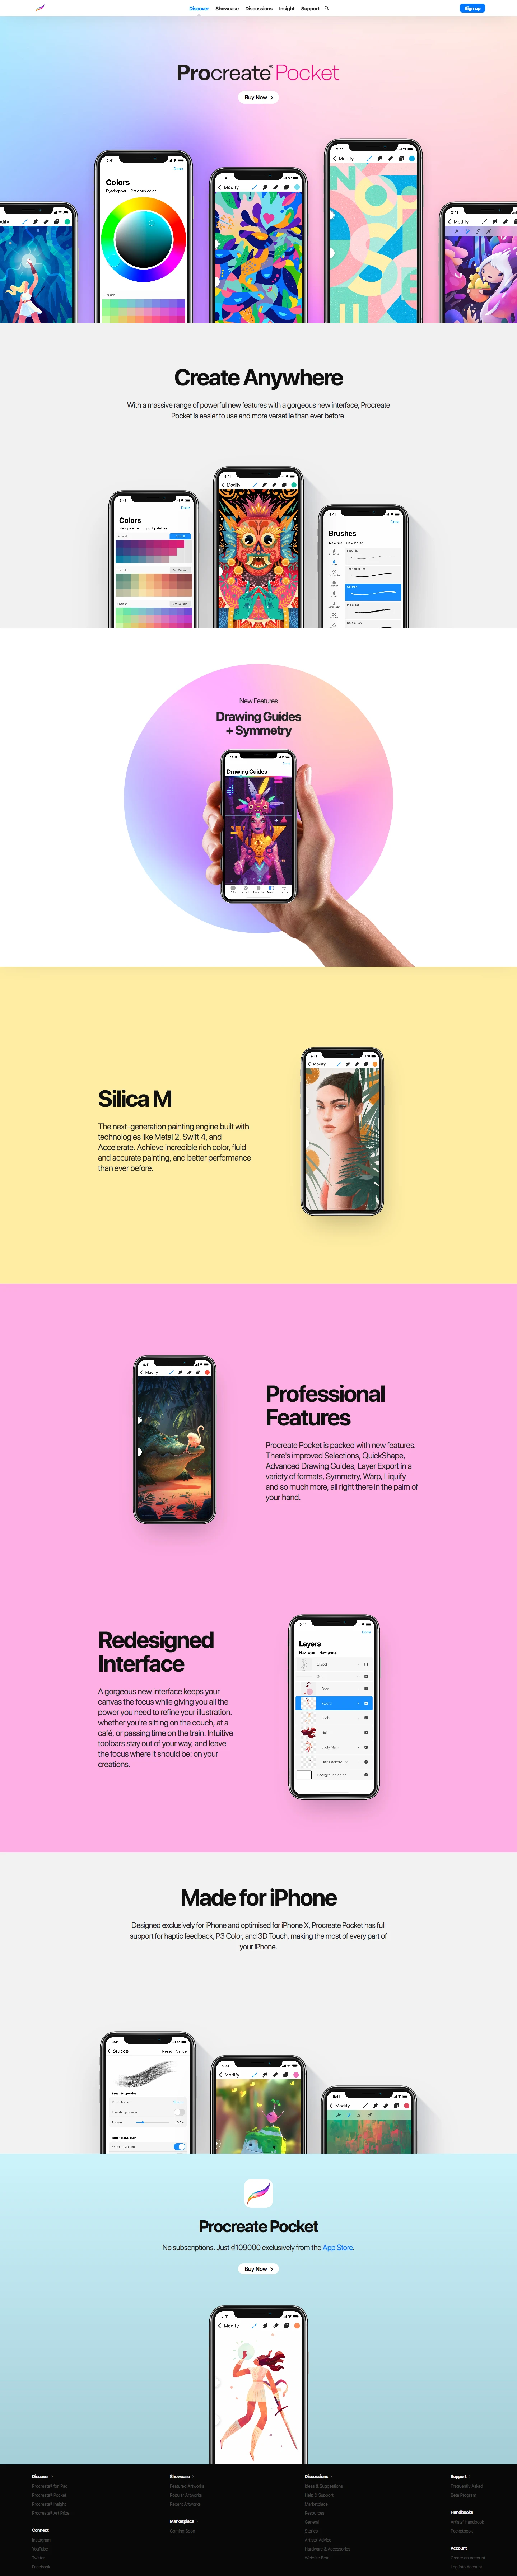 Procreate Pocket Landing Page Example: New design. New engine. New attitude. With a massive range of powerful new features with a gorgeous new interface, Procreate Pocket is easier to use and more versatile than ever before.